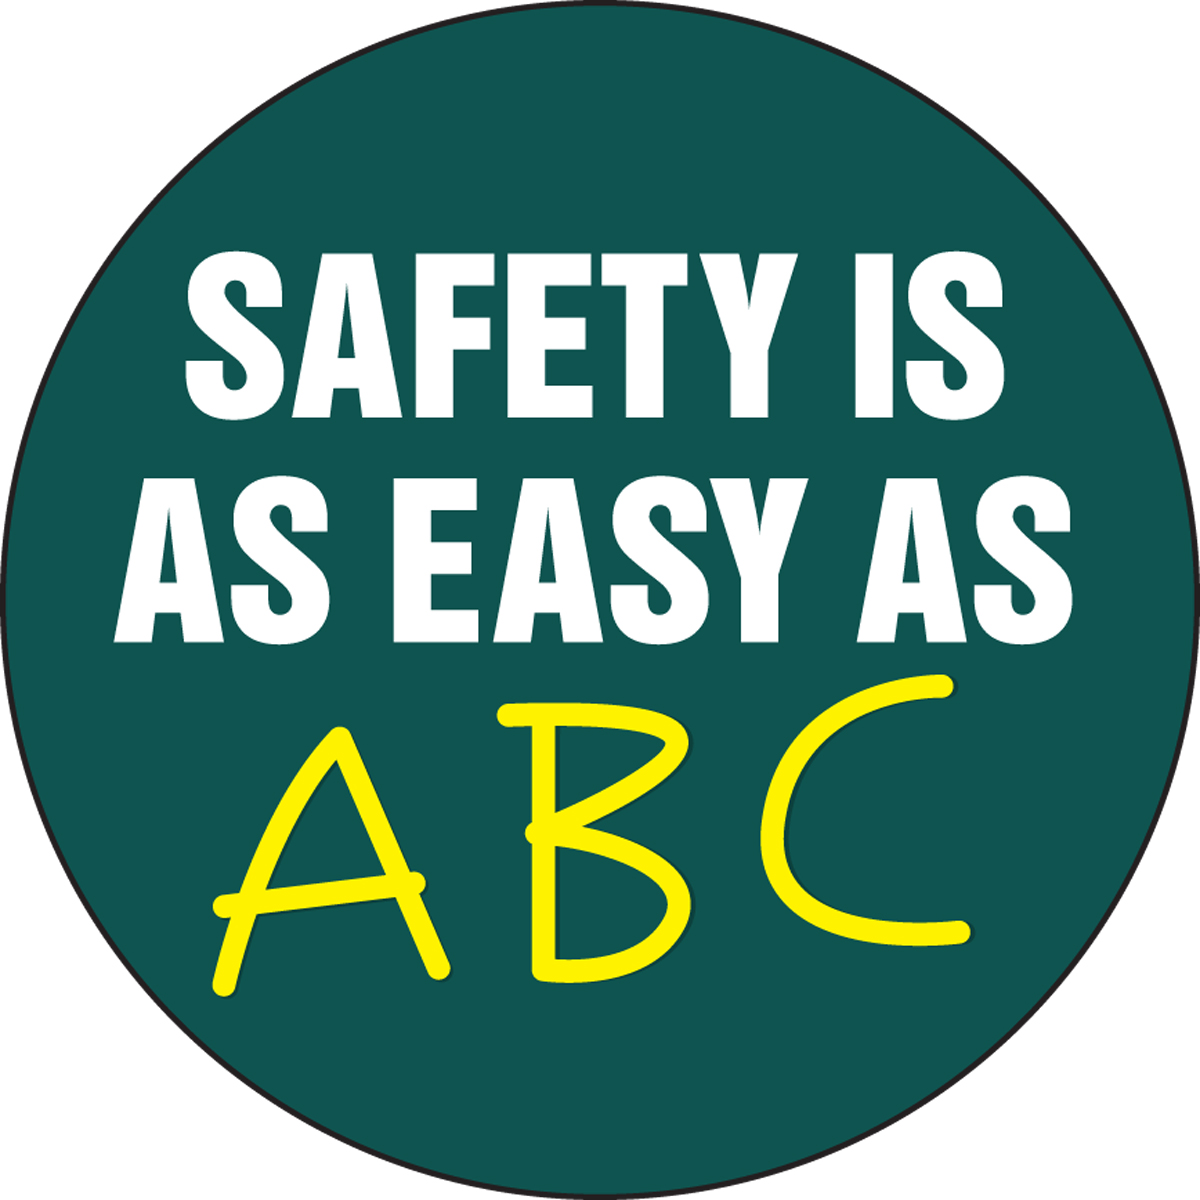 SAFETY IS AS EASY AS ABC